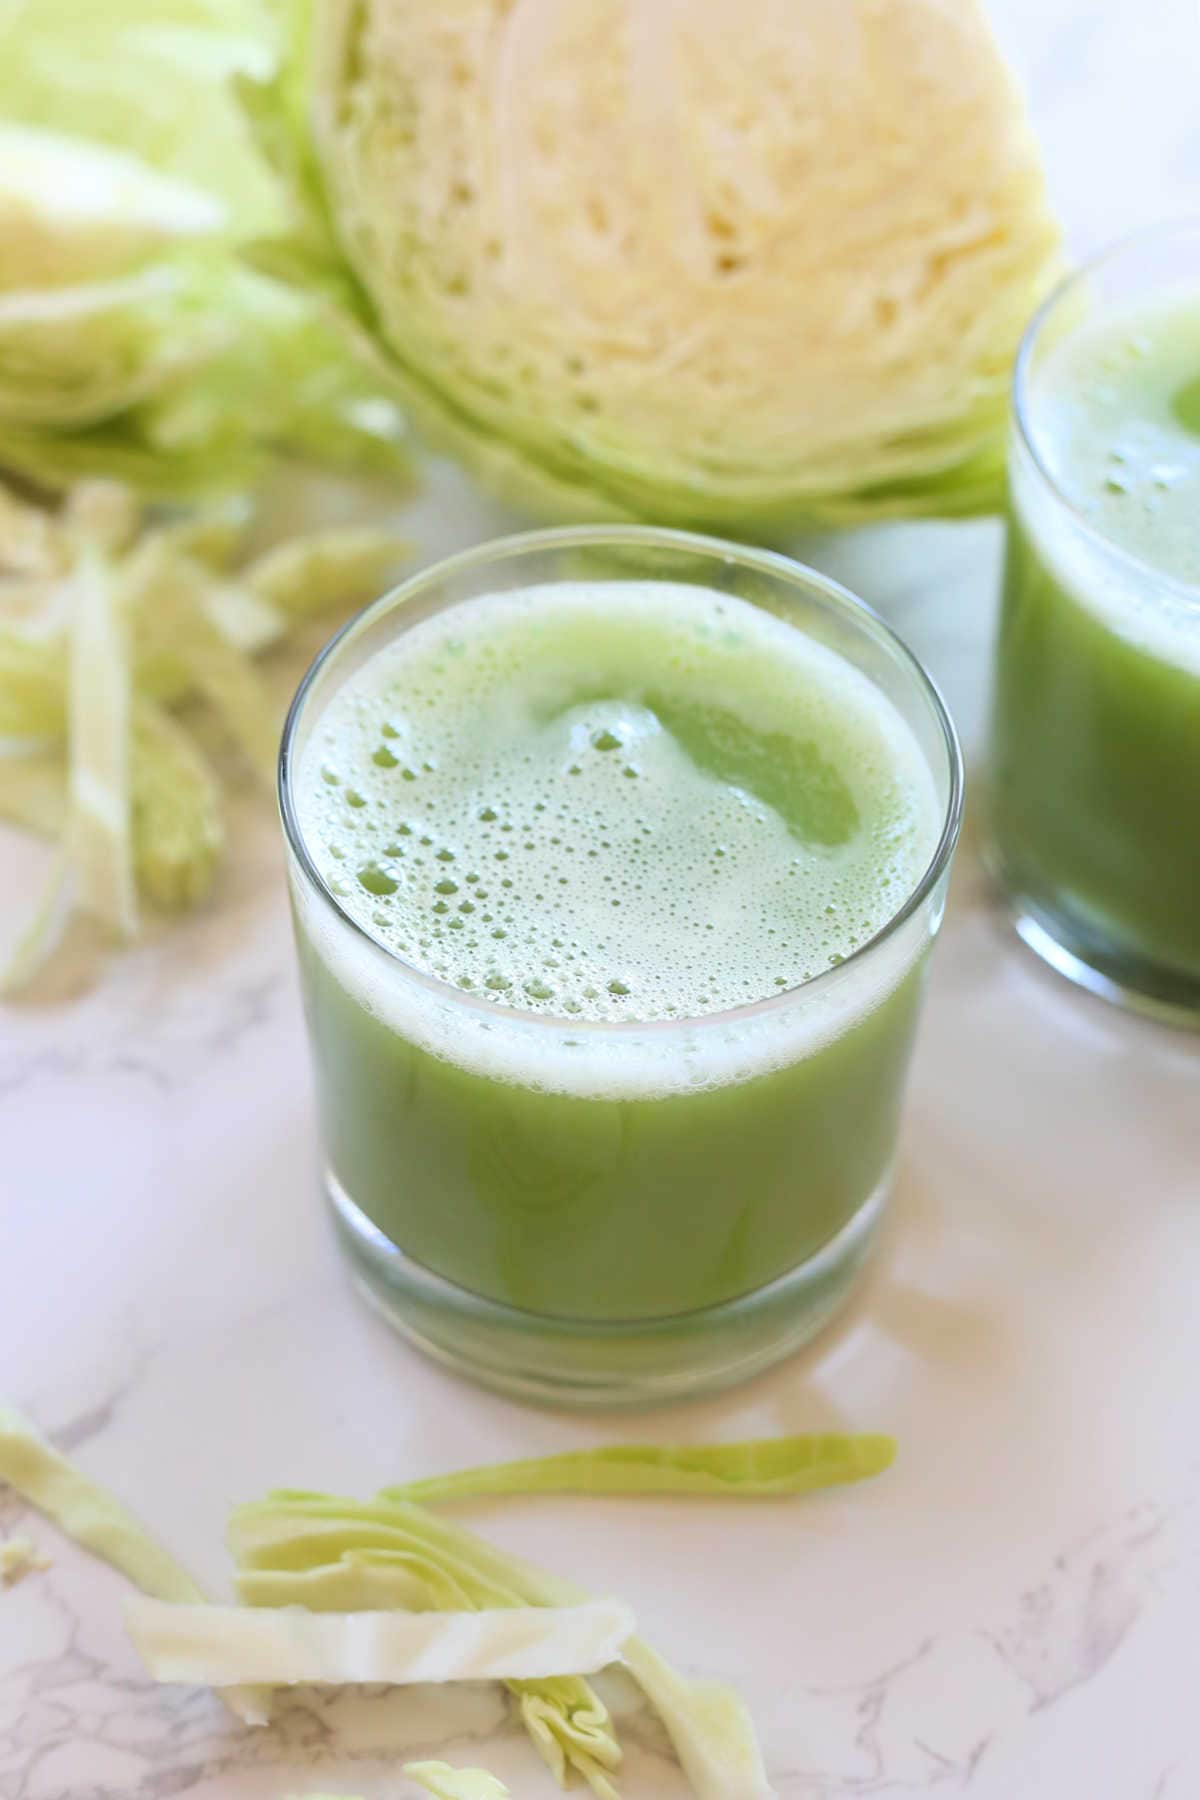 Fresh glass of cabbage juice.